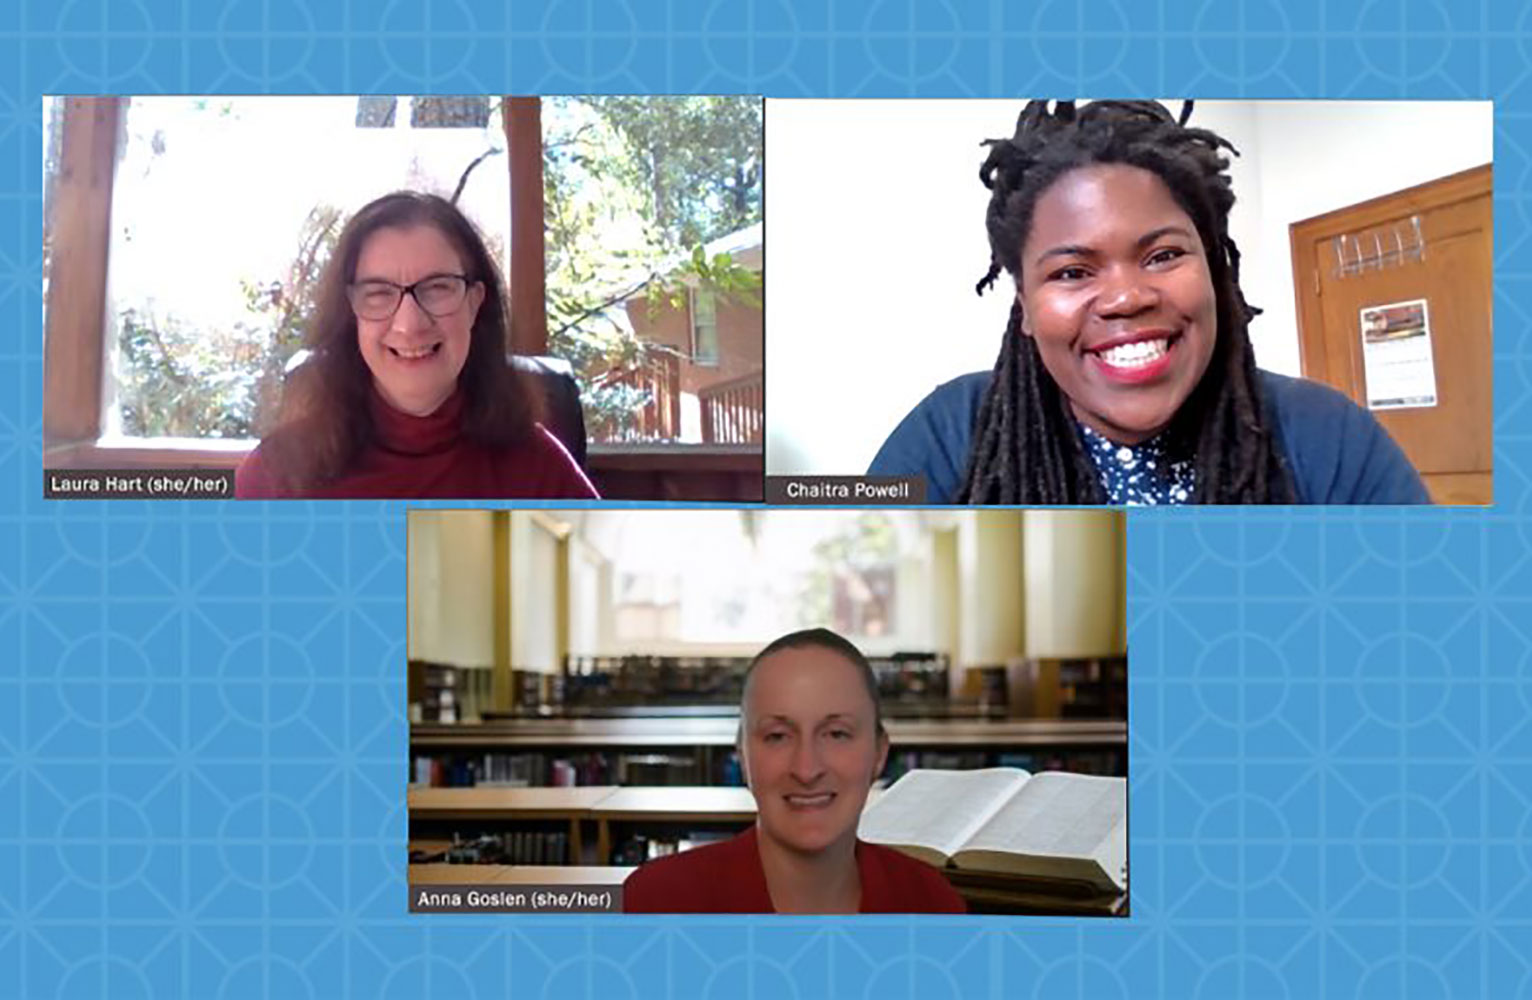 Archivists Laura, Anna, and Chaitra in a virtual meeting